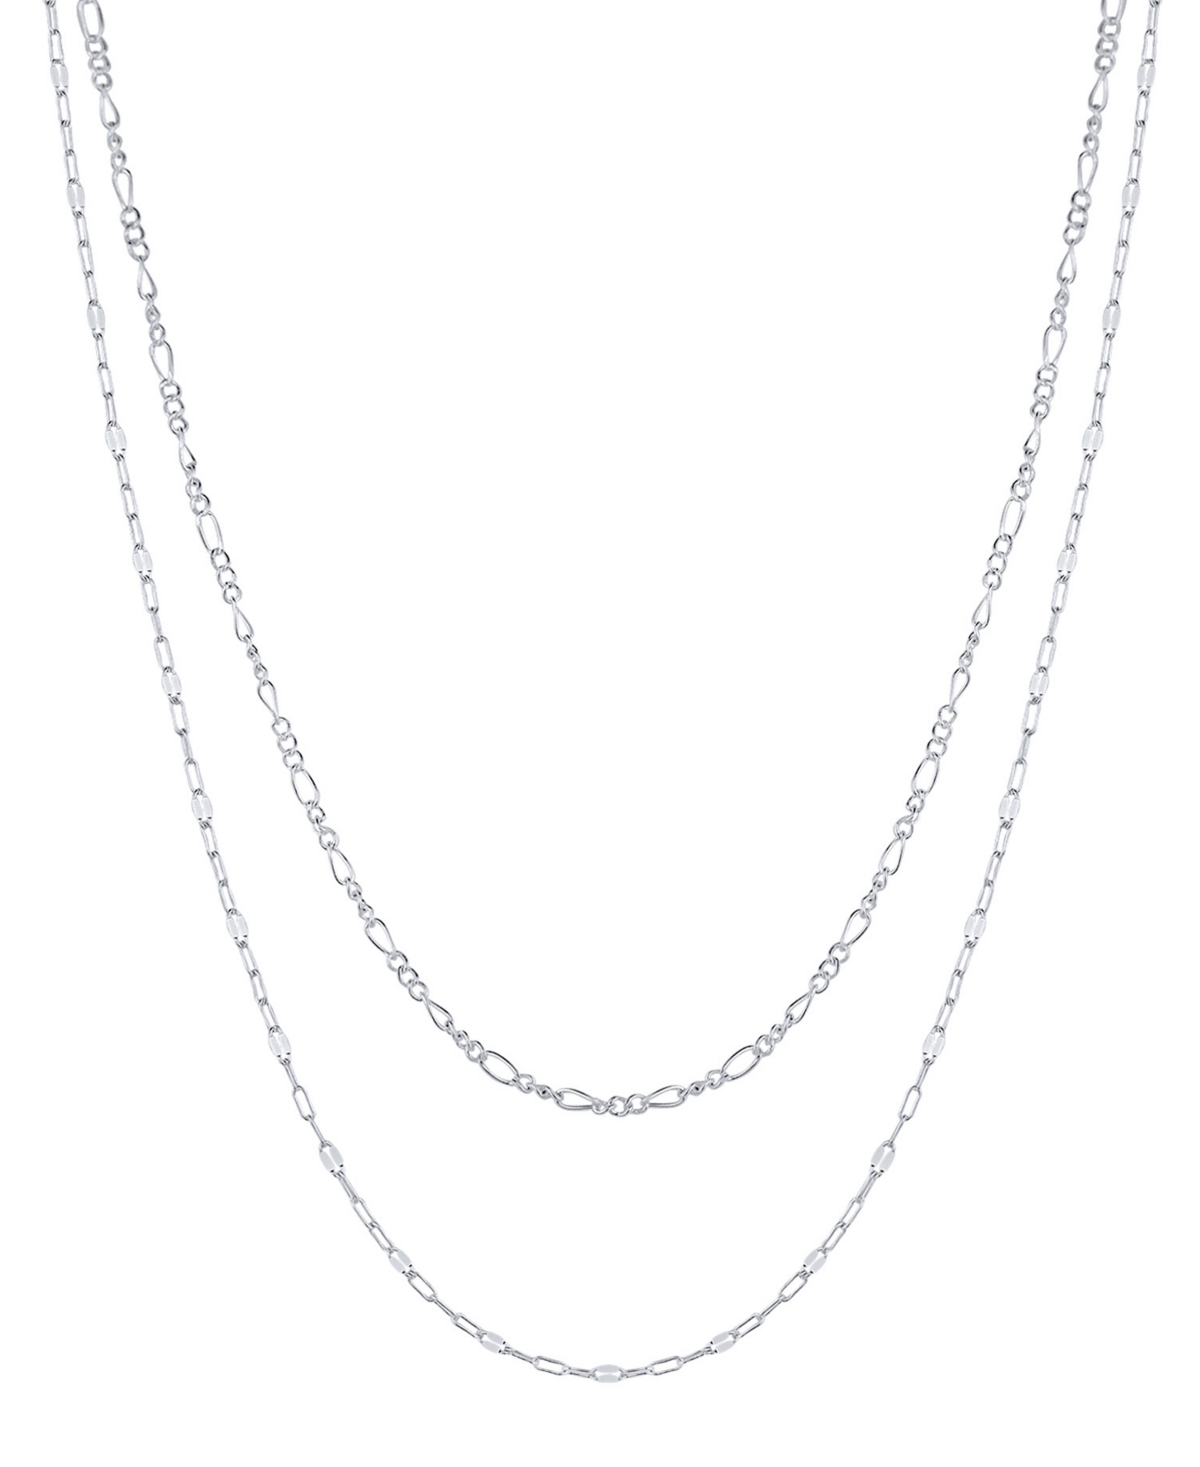 Silver-Plated Figaro and Kiss Chain Double Strand Necklace - Silver